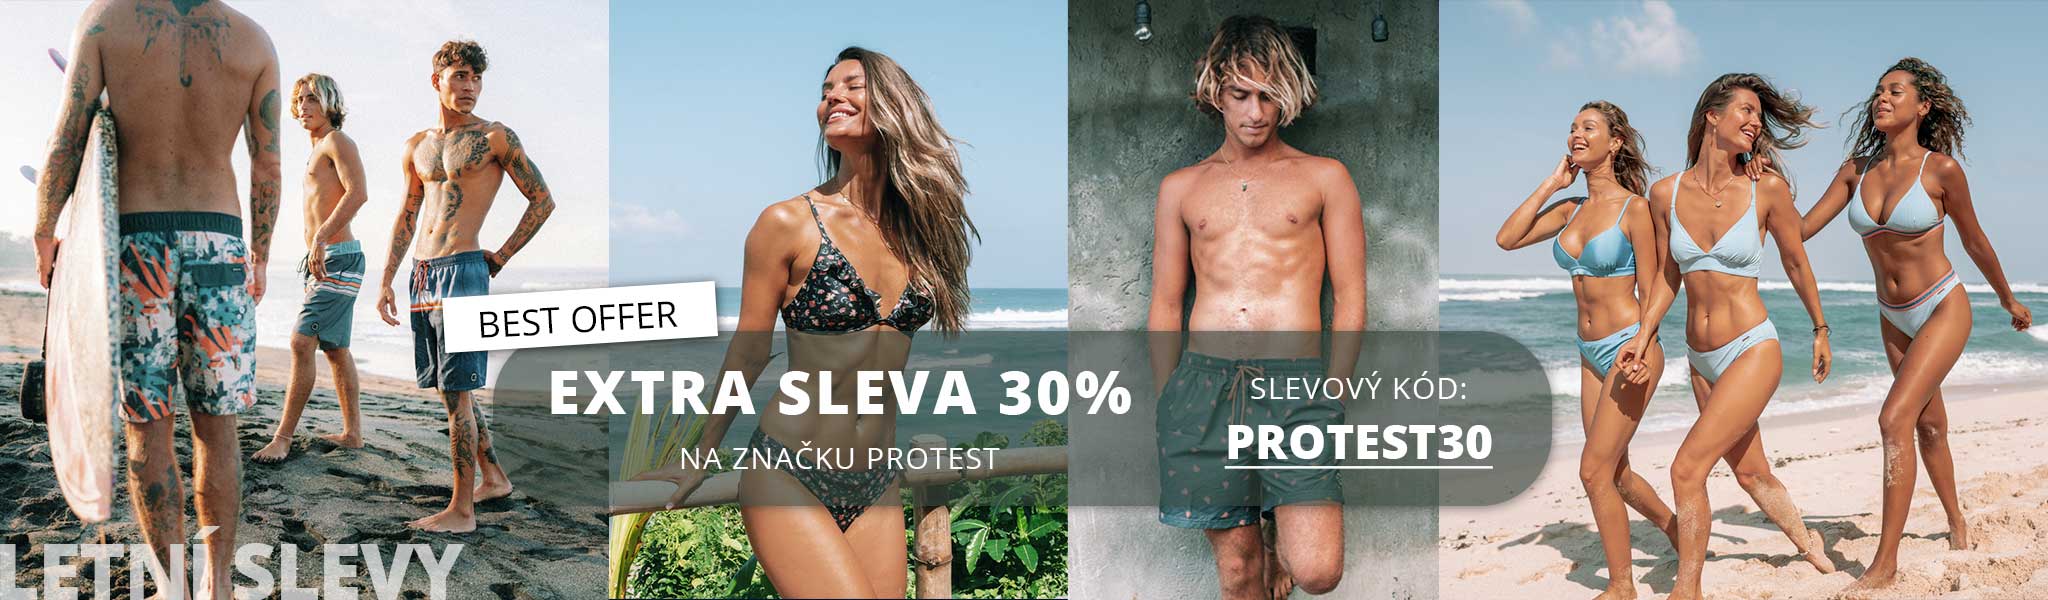 PROTEST -30%